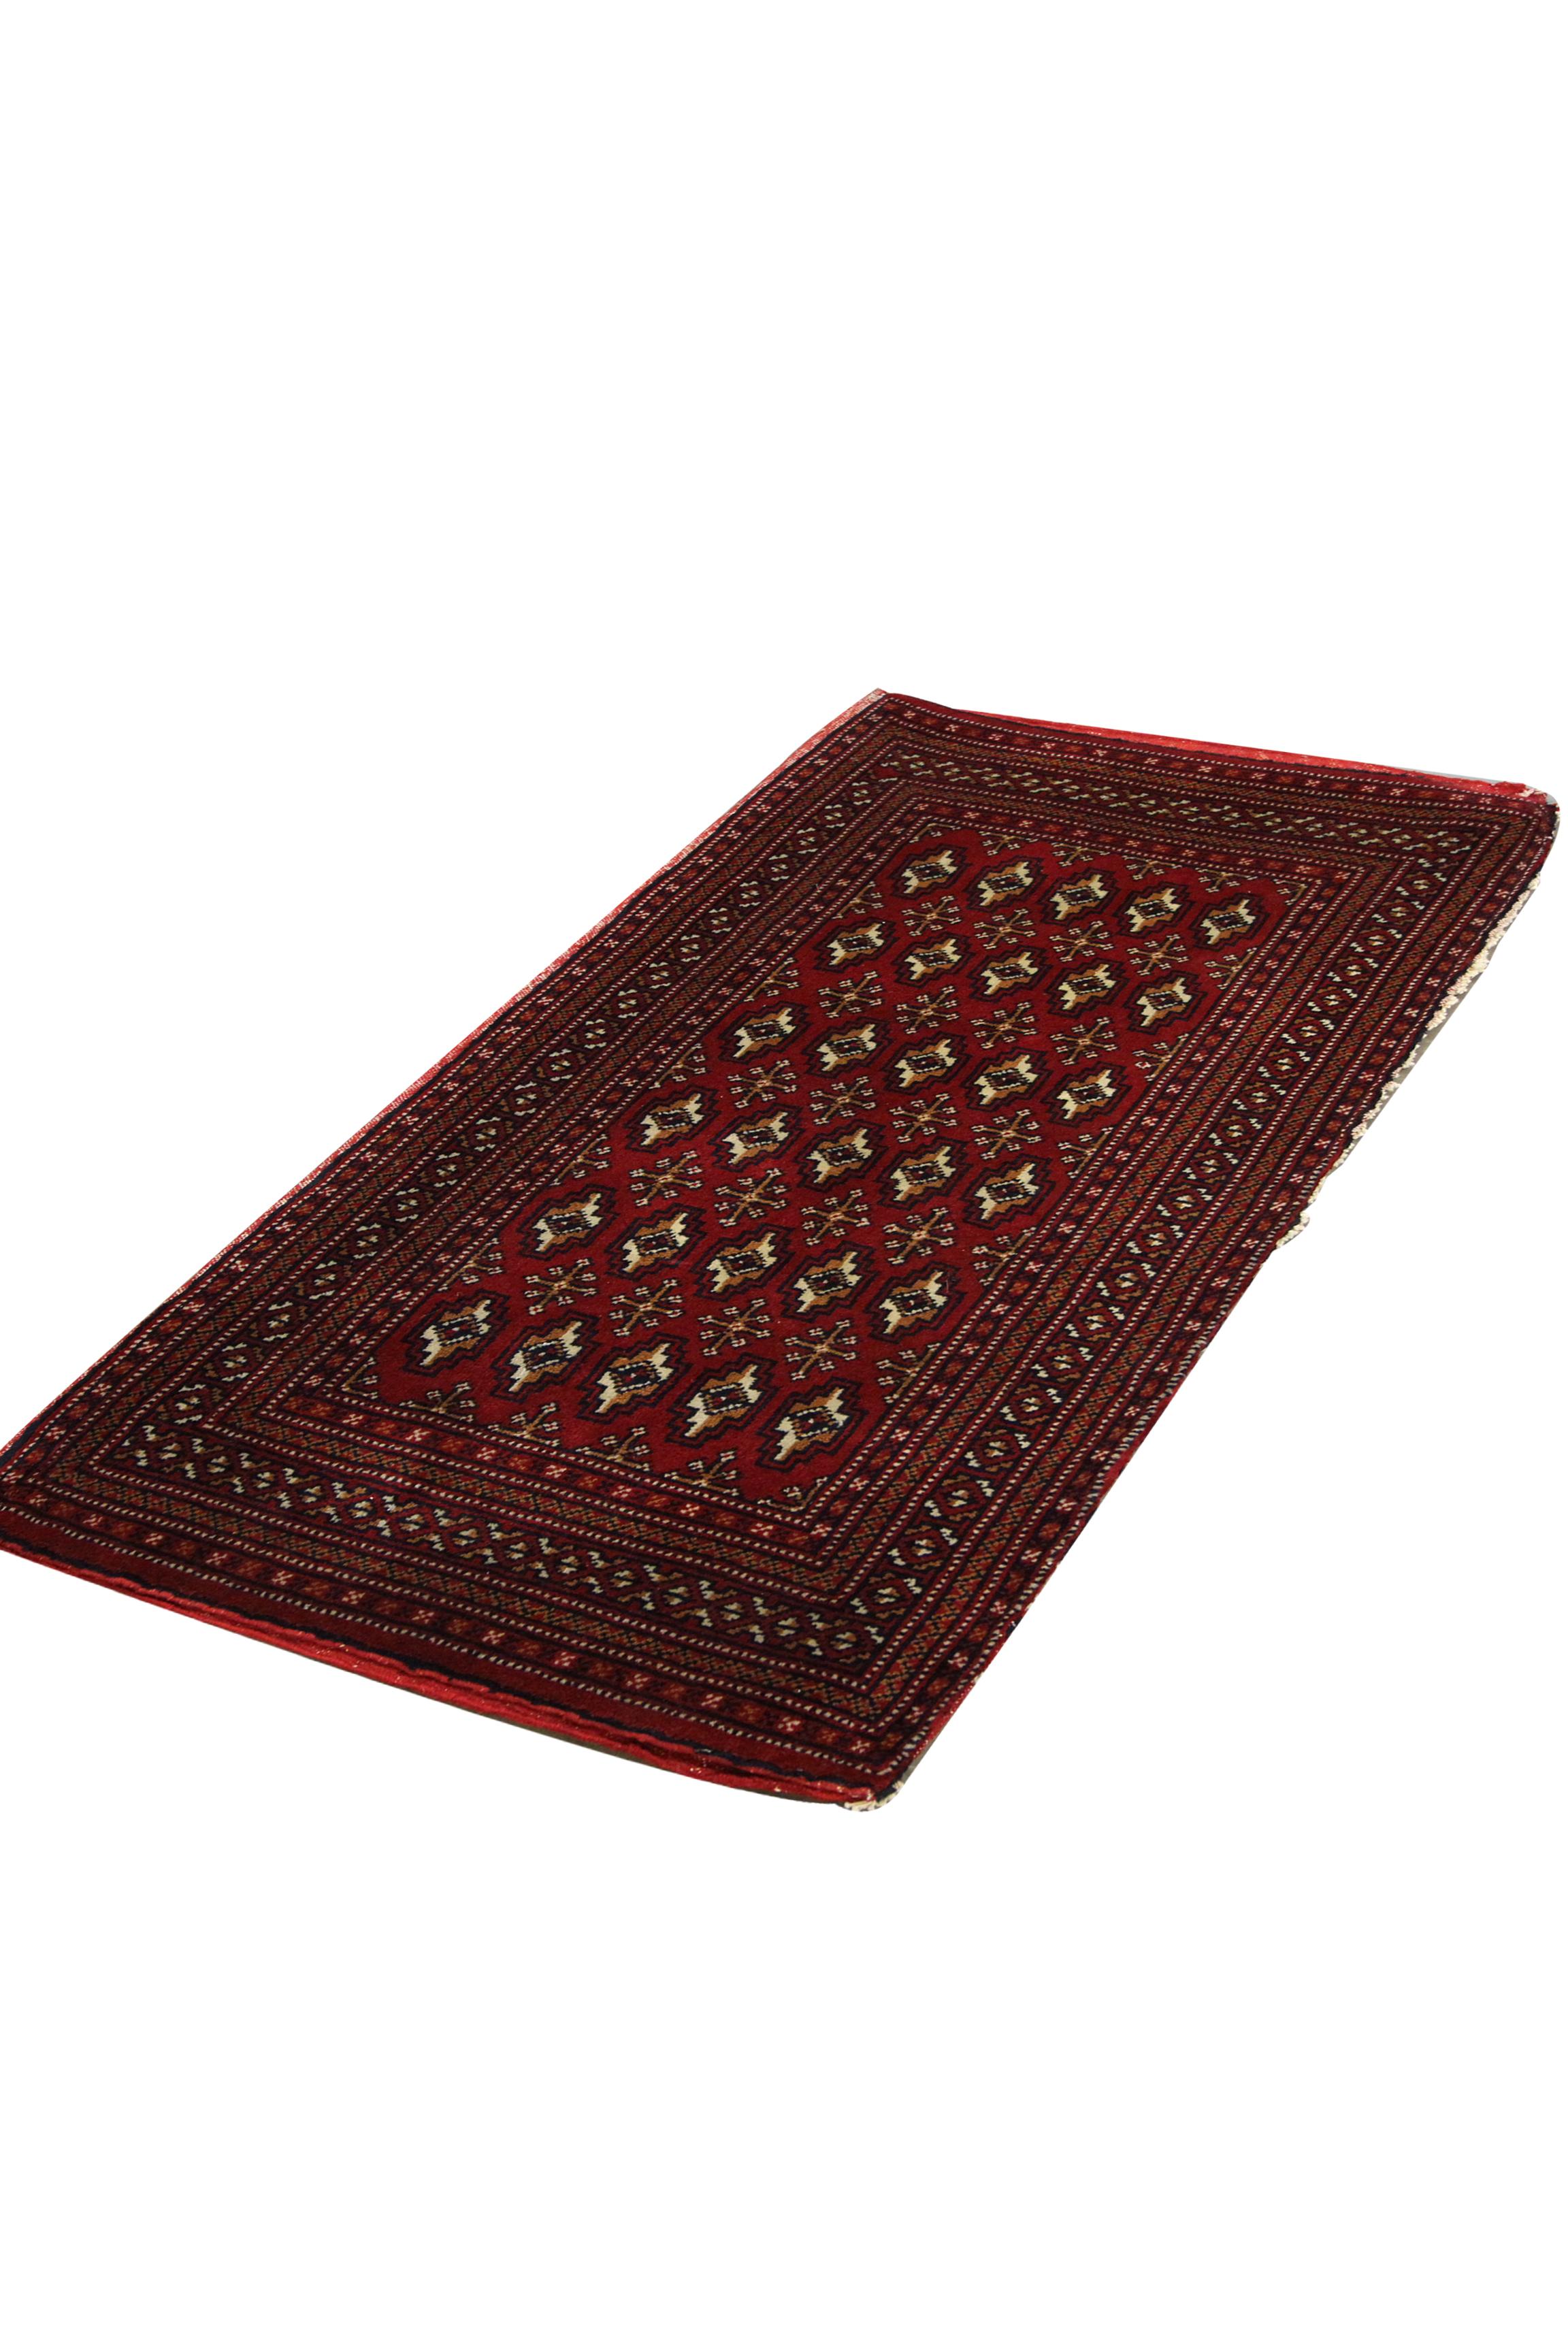 This vintage carpet is a great example of handwoven rugs constructed in the 1960s. The central design features a traditional repeating pattern design woven on a rich red background with accents of brown, cream and beige. The traditional design and